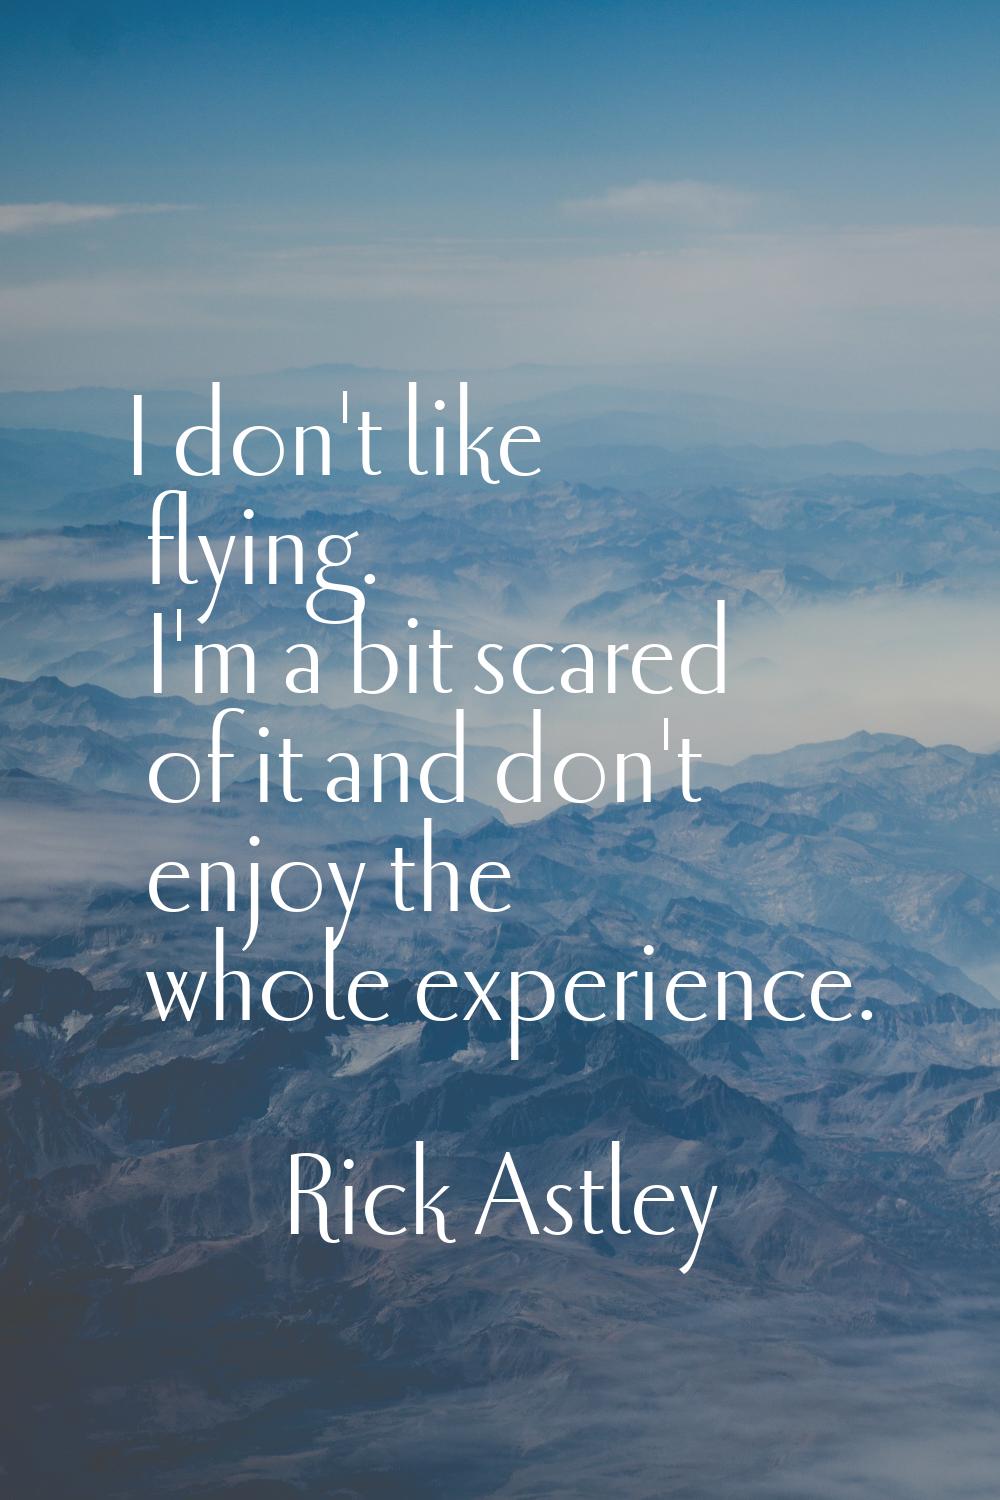 I don't like flying. I'm a bit scared of it and don't enjoy the whole experience.